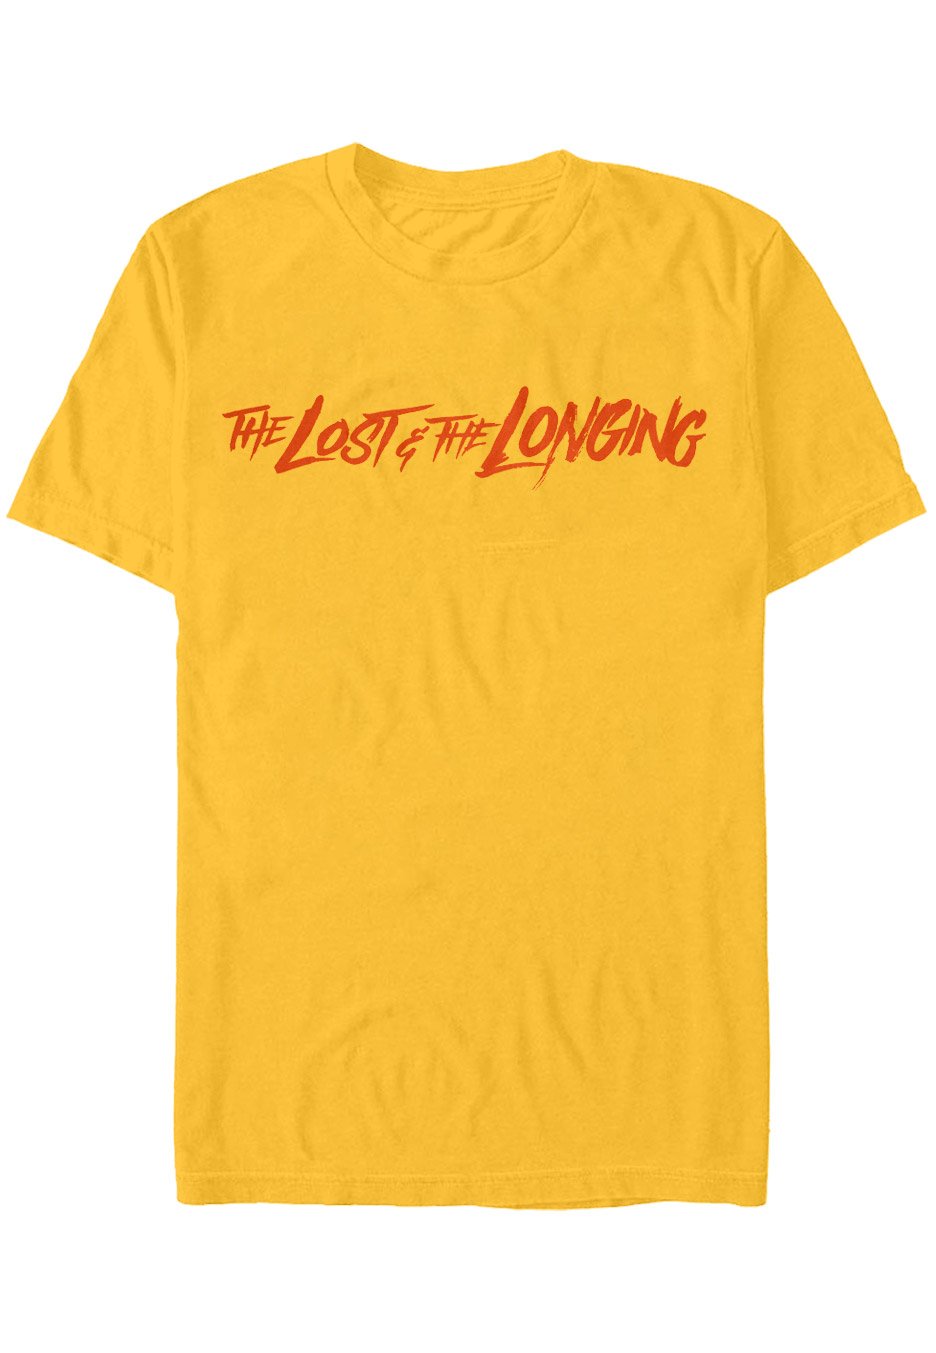 Alpha Wolf & Holding Absence - The Lost & The Longing Gold - T-Shirt